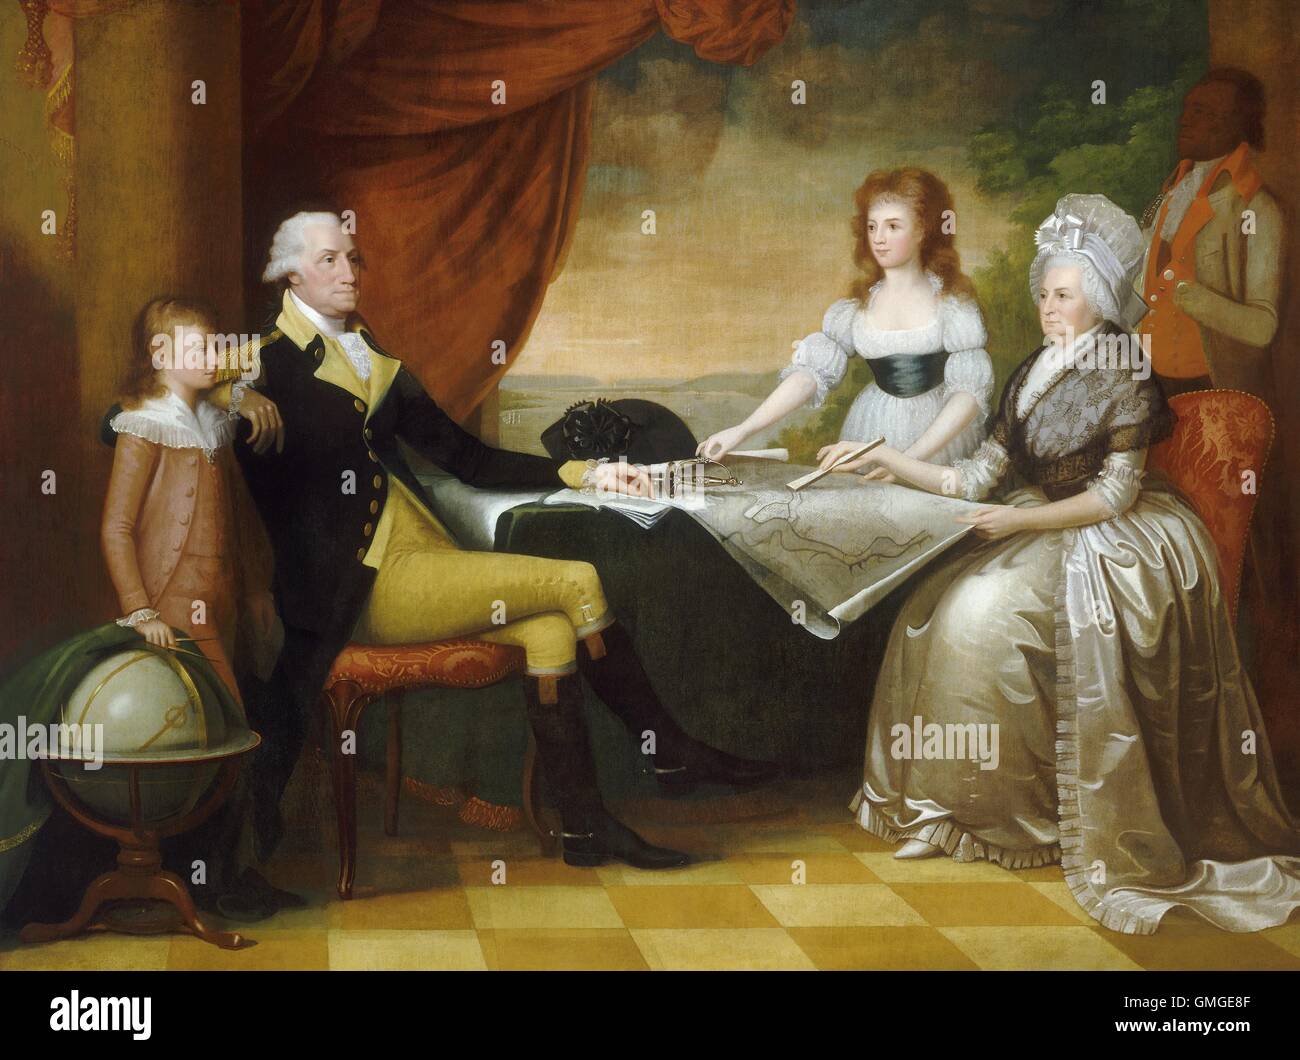 The Washington Family, by Edward Savage, c.1789-96, American painting, oil on canvas. Savage's created this monumental family portrait from life sittings of America's first 'First Family' after the Washington's posed for studies in New York City in 1789-9 (BSLOC 2016 5 63) Stock Photo